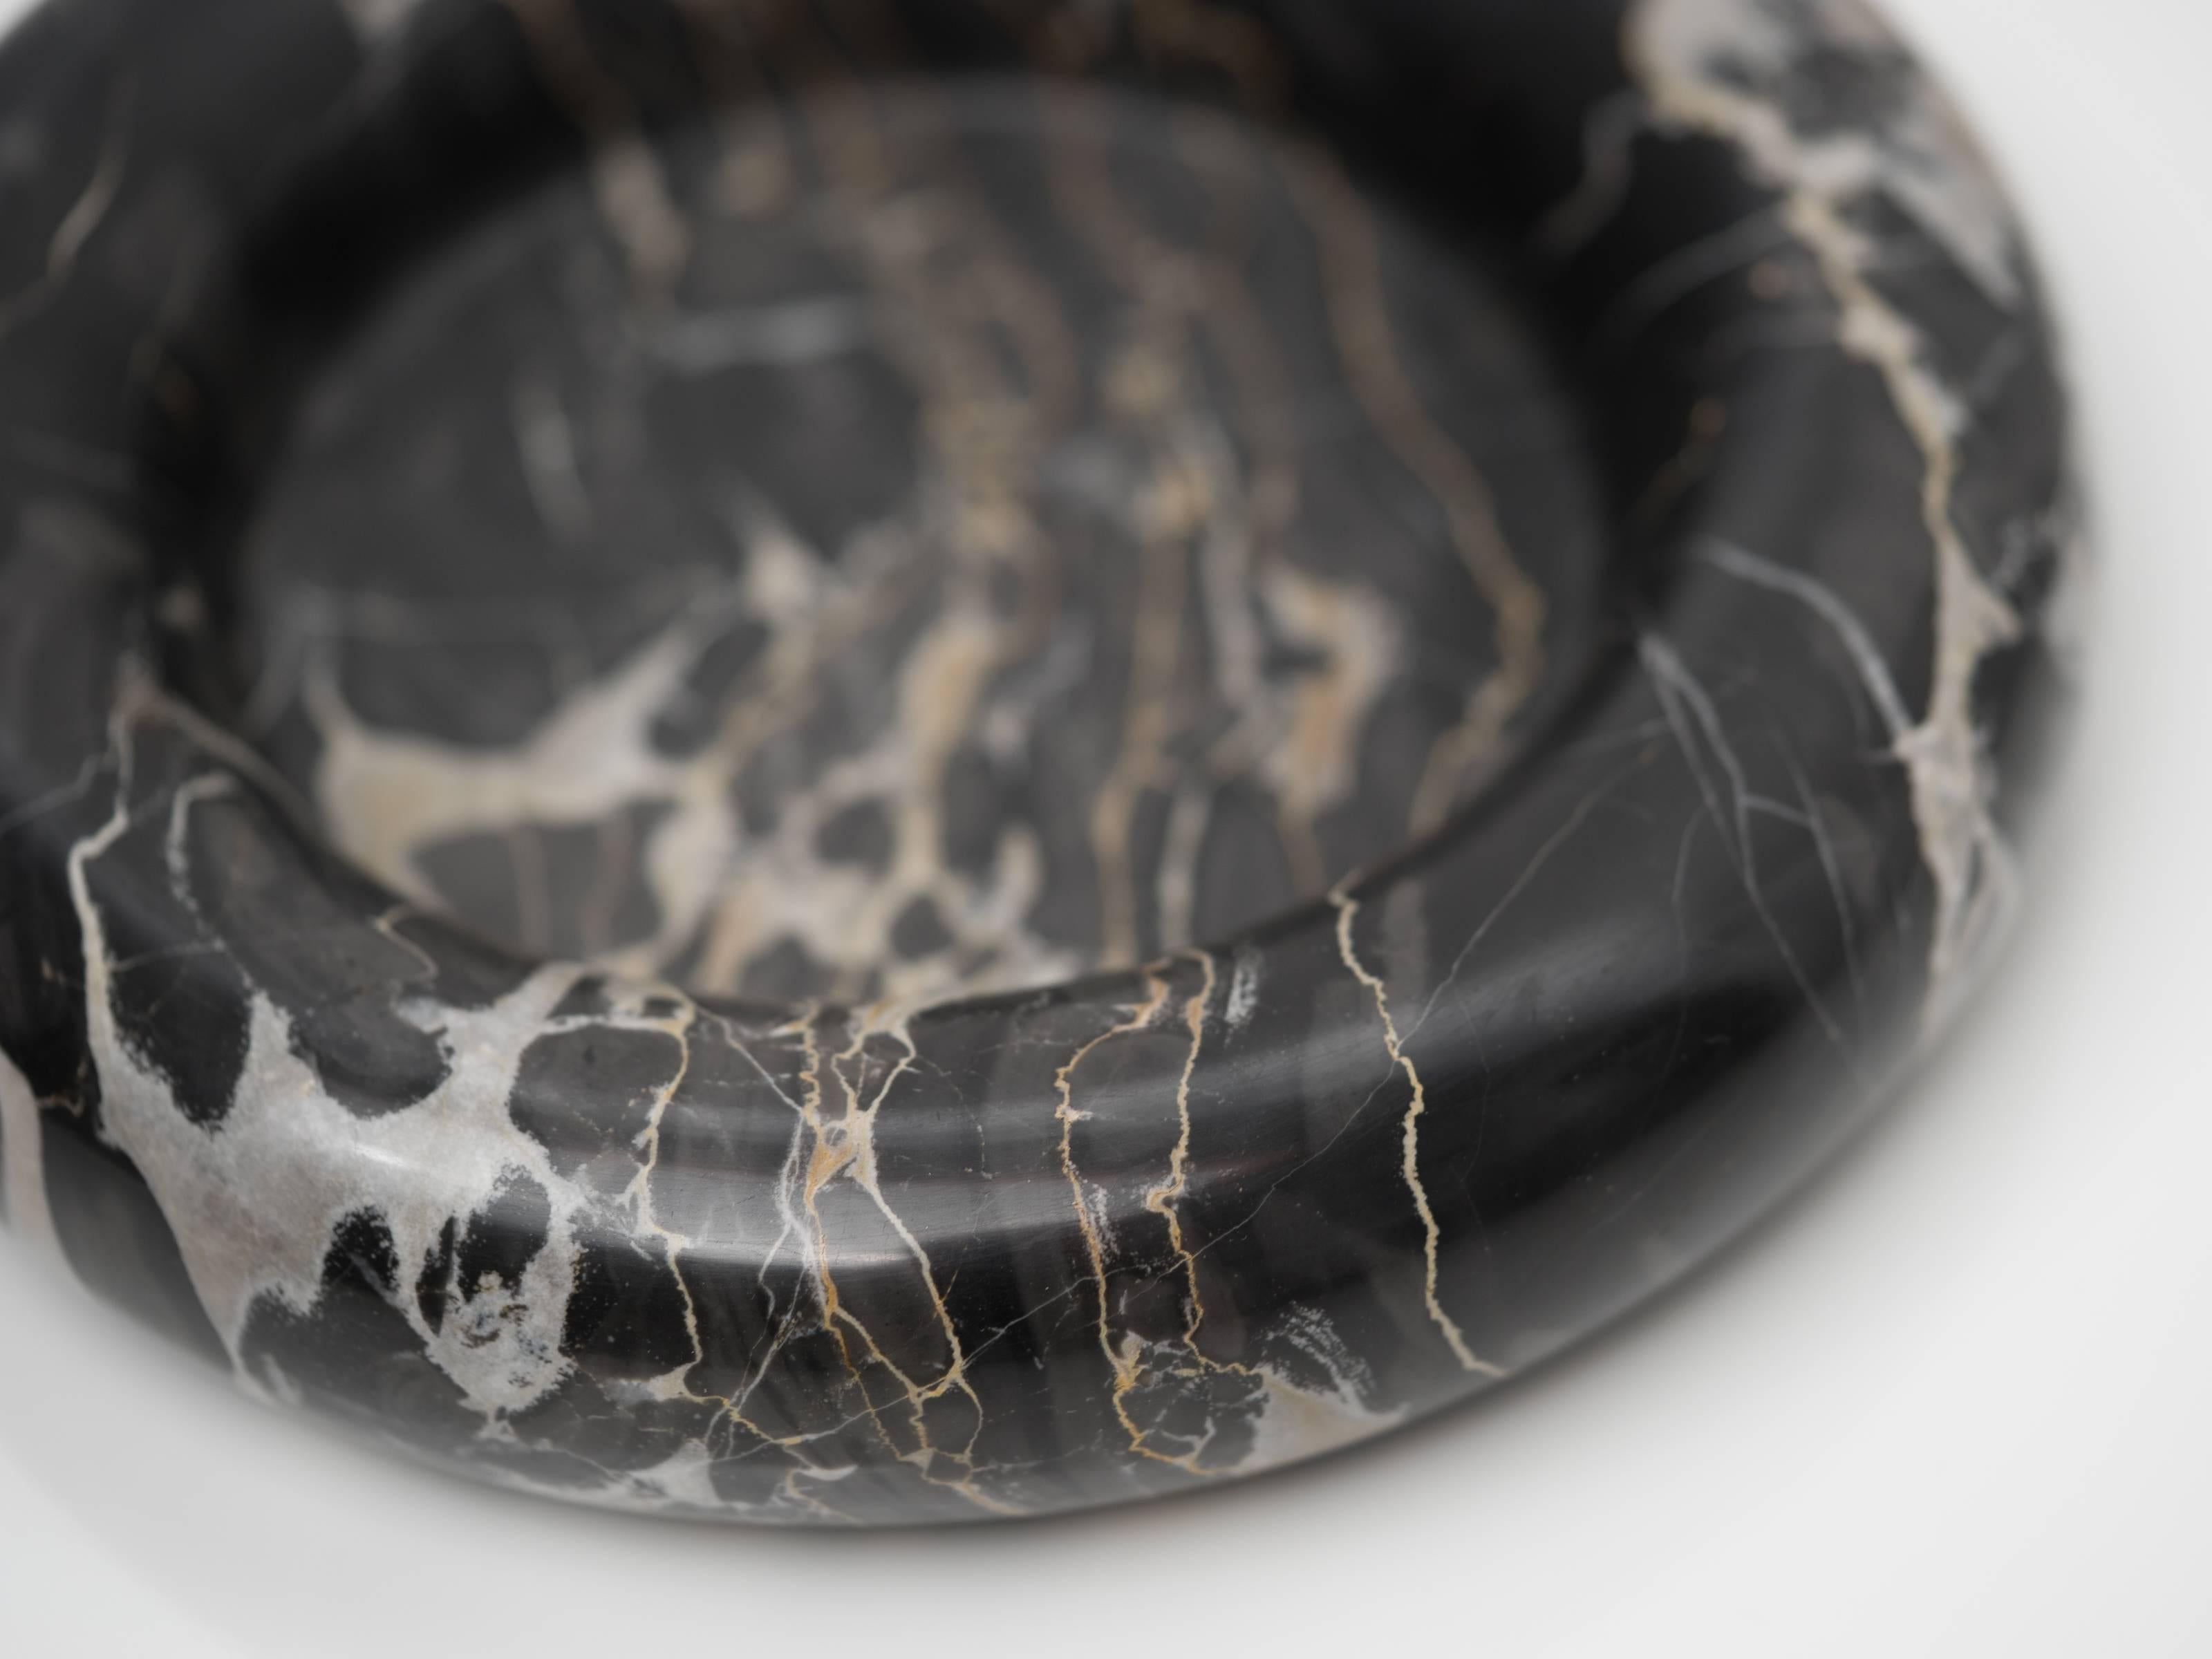 Italian Large Black Marble Dish with Light Grey and Gold Veining by Up & Up, 1973